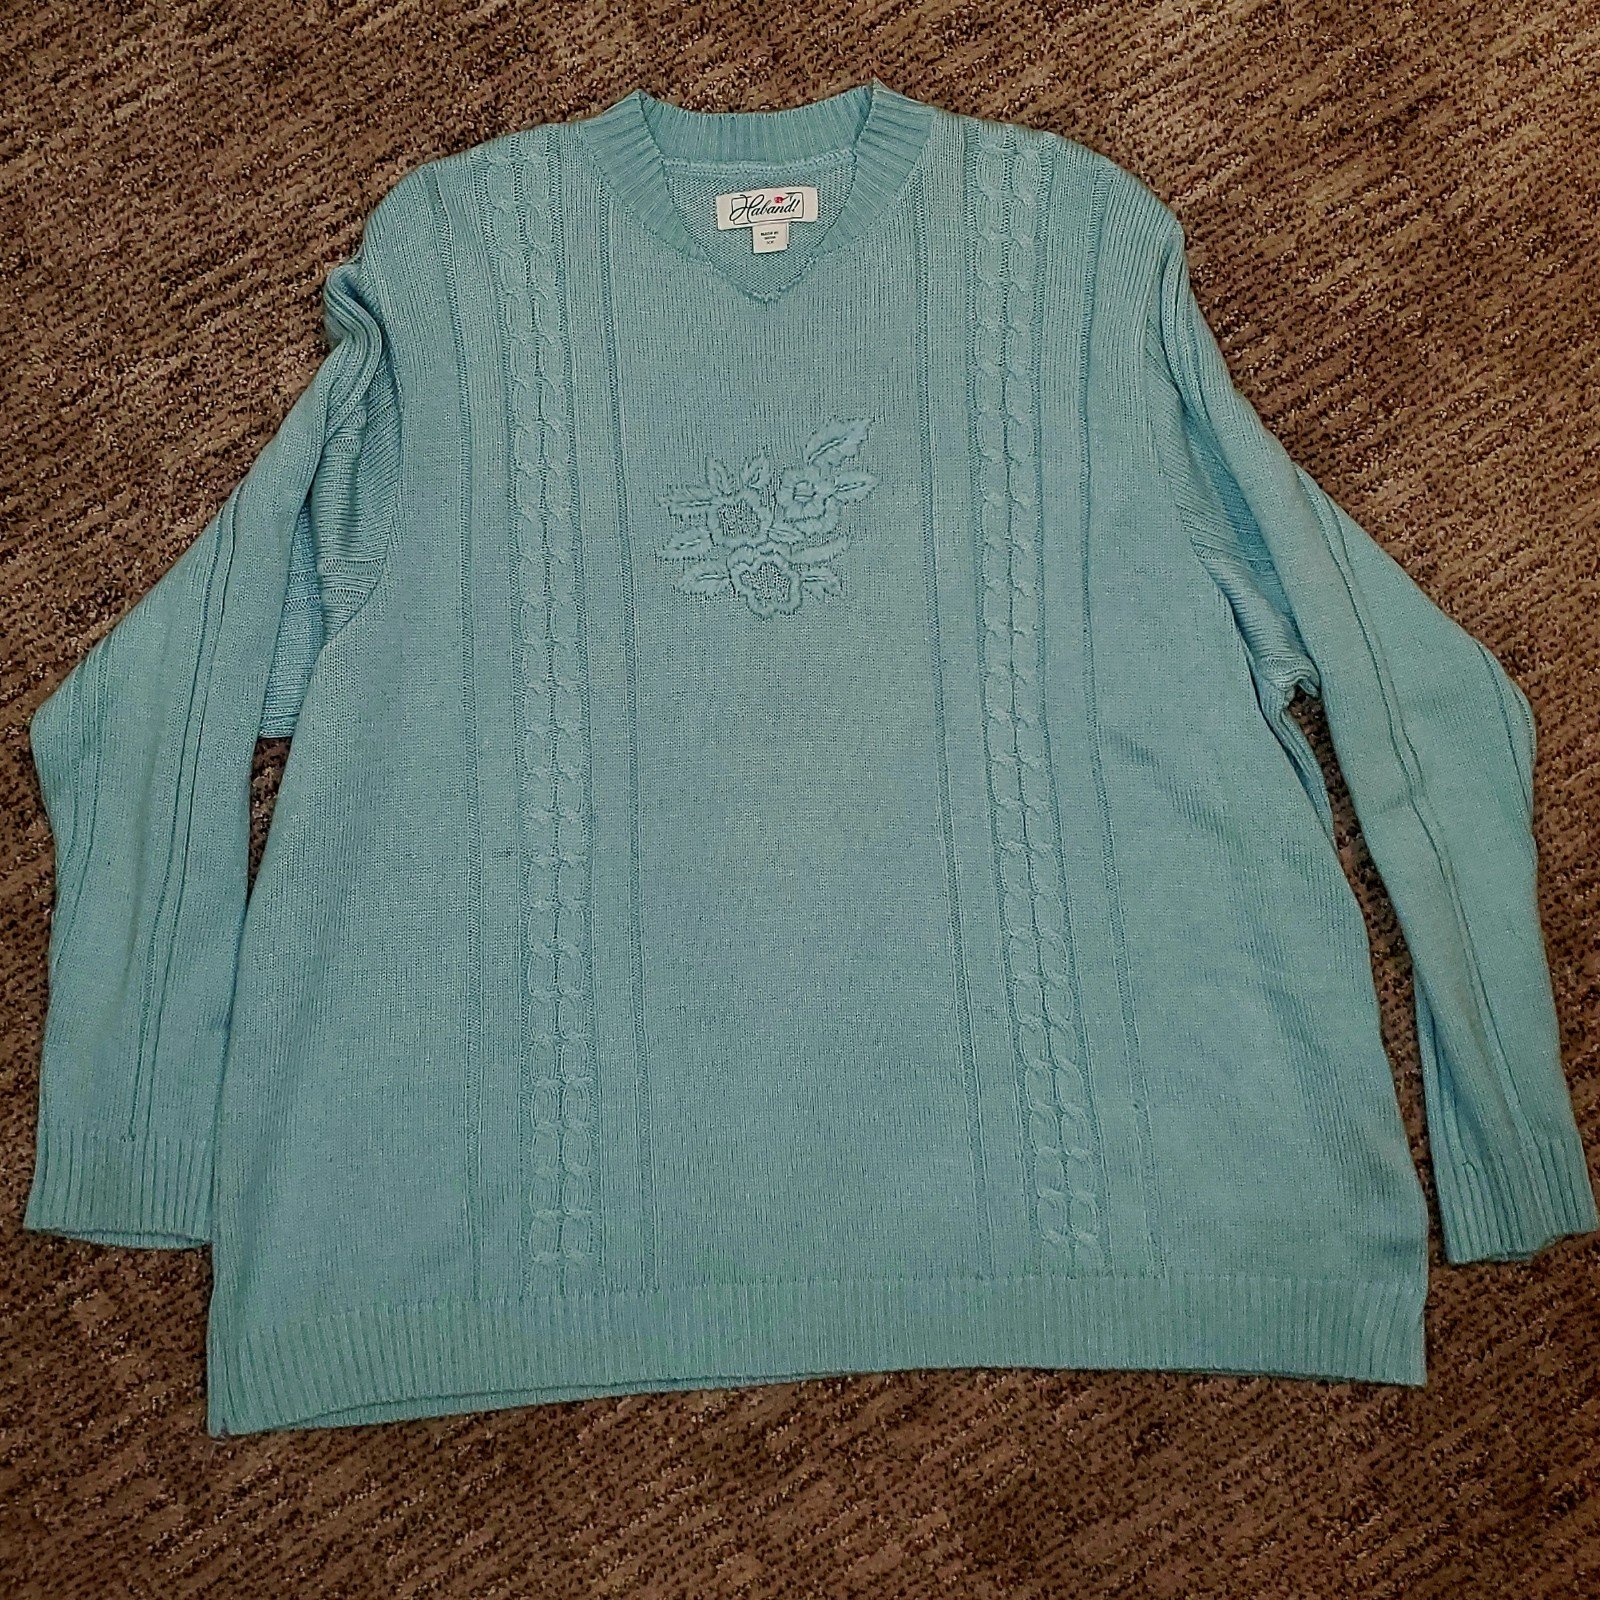 Great vintage floral embroidered sweater Iq1SCwhQq Cool